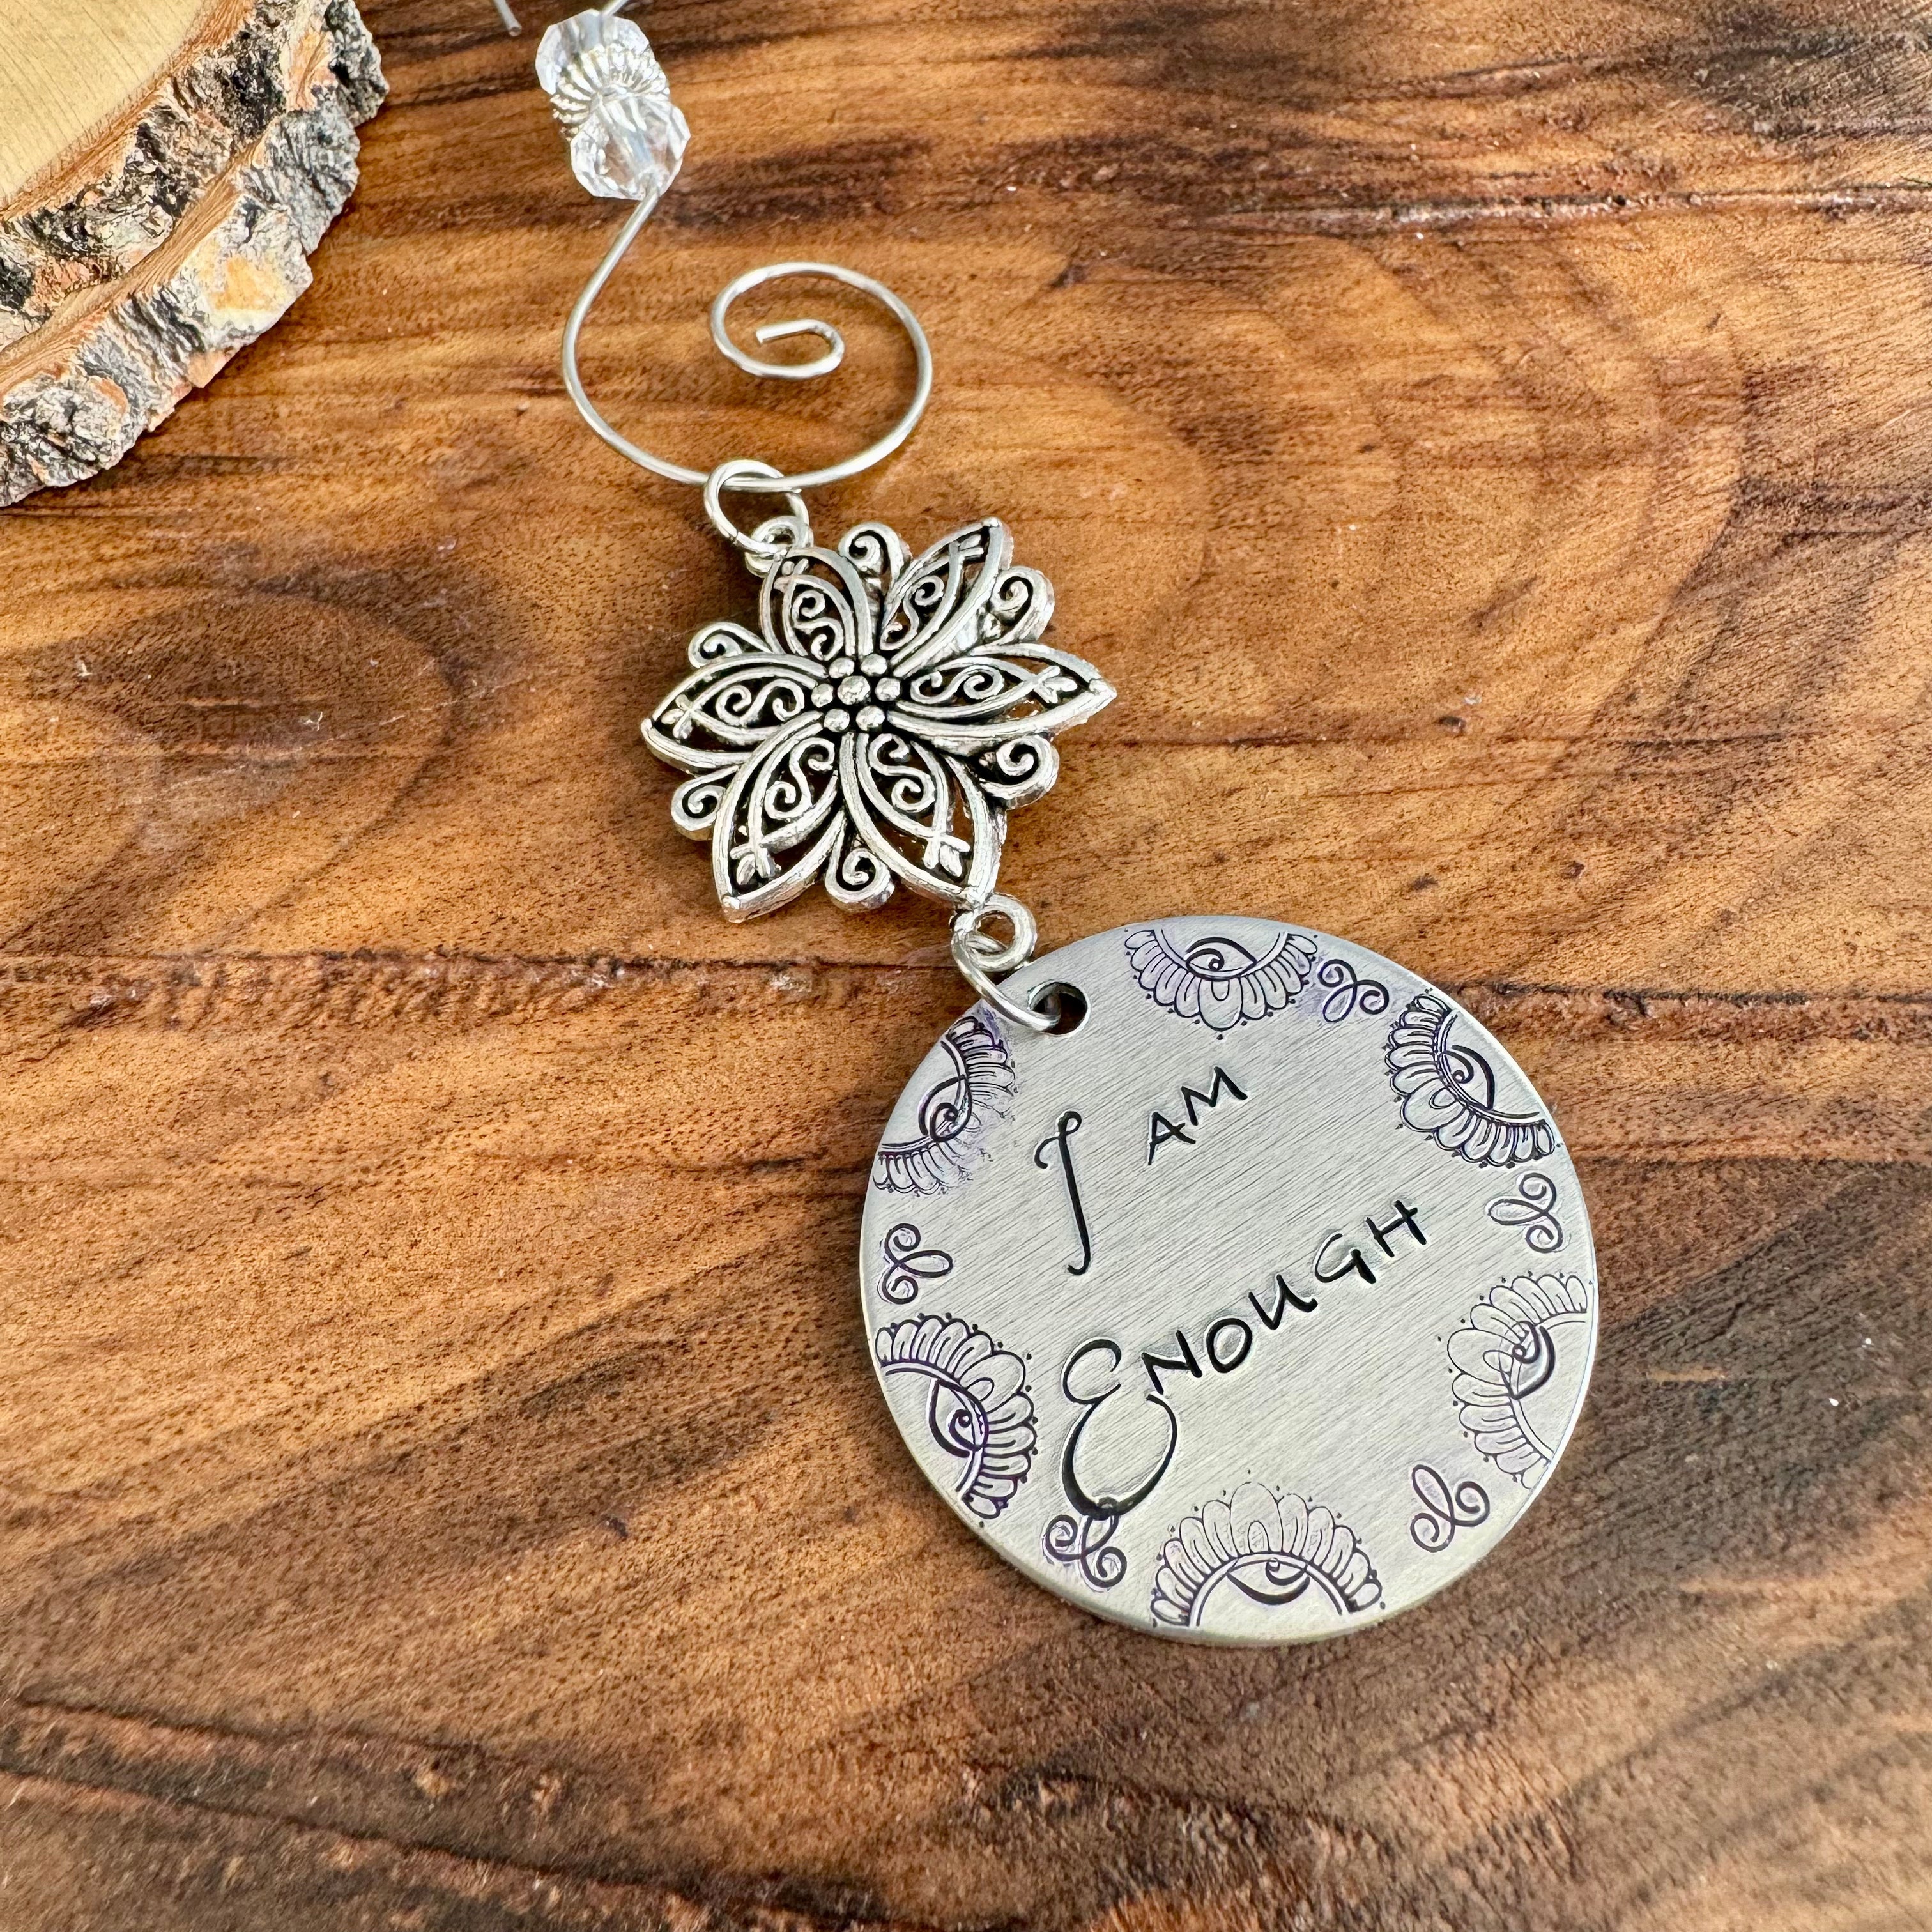 &quot;I AM&quot; MANDALA MANTRA ORNAMENT WITH FLOWER CHARM - PERSONALIZED